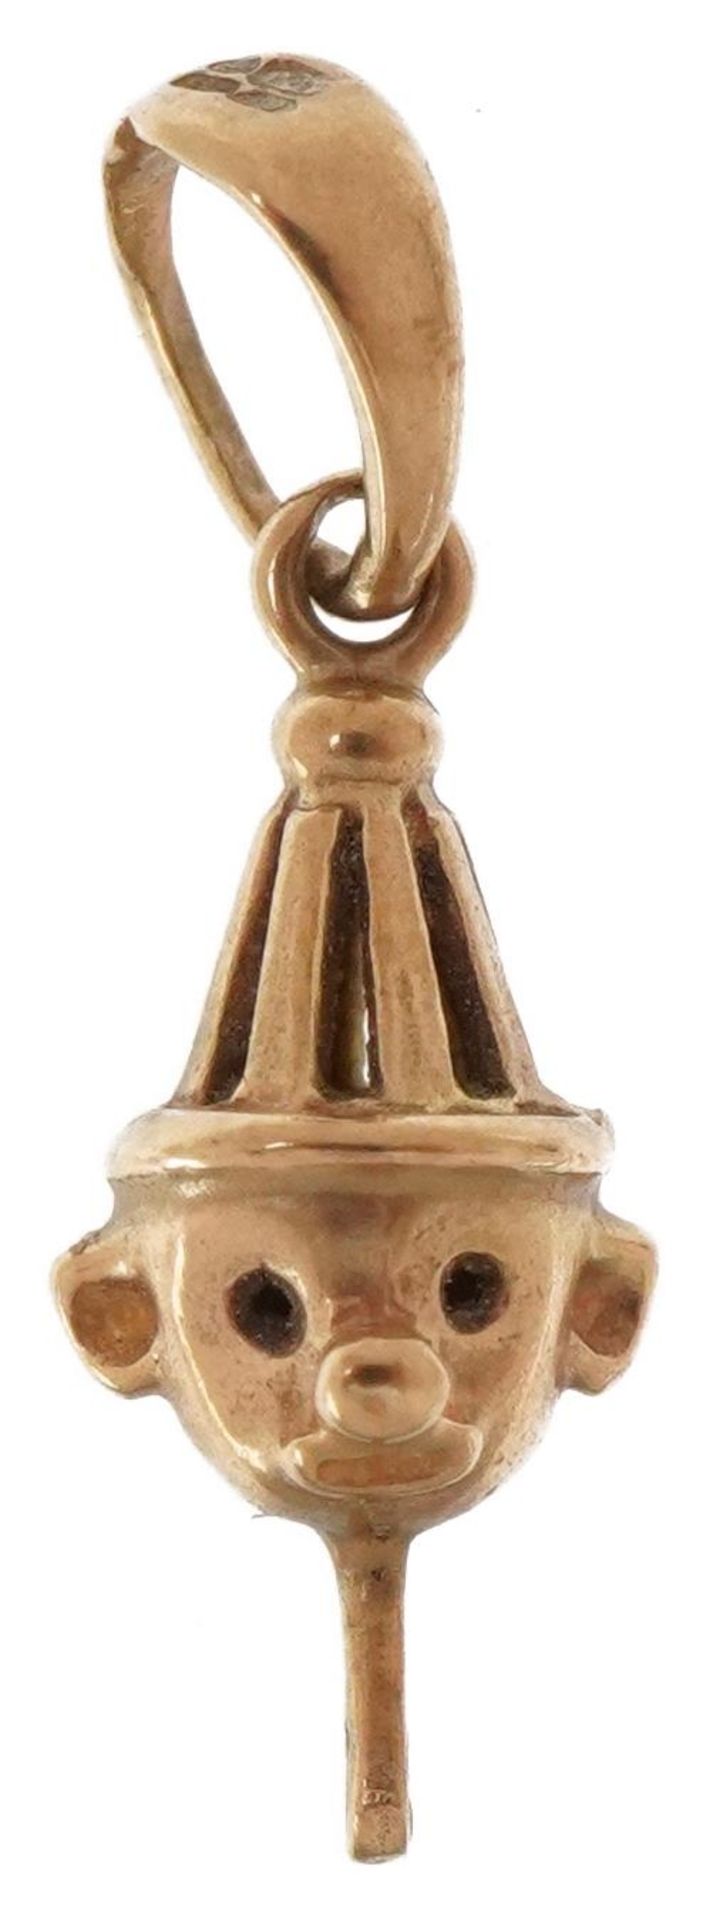 9ct gold clown head charm, 1.5cm high, 0.5g : For further information on this lot please visit